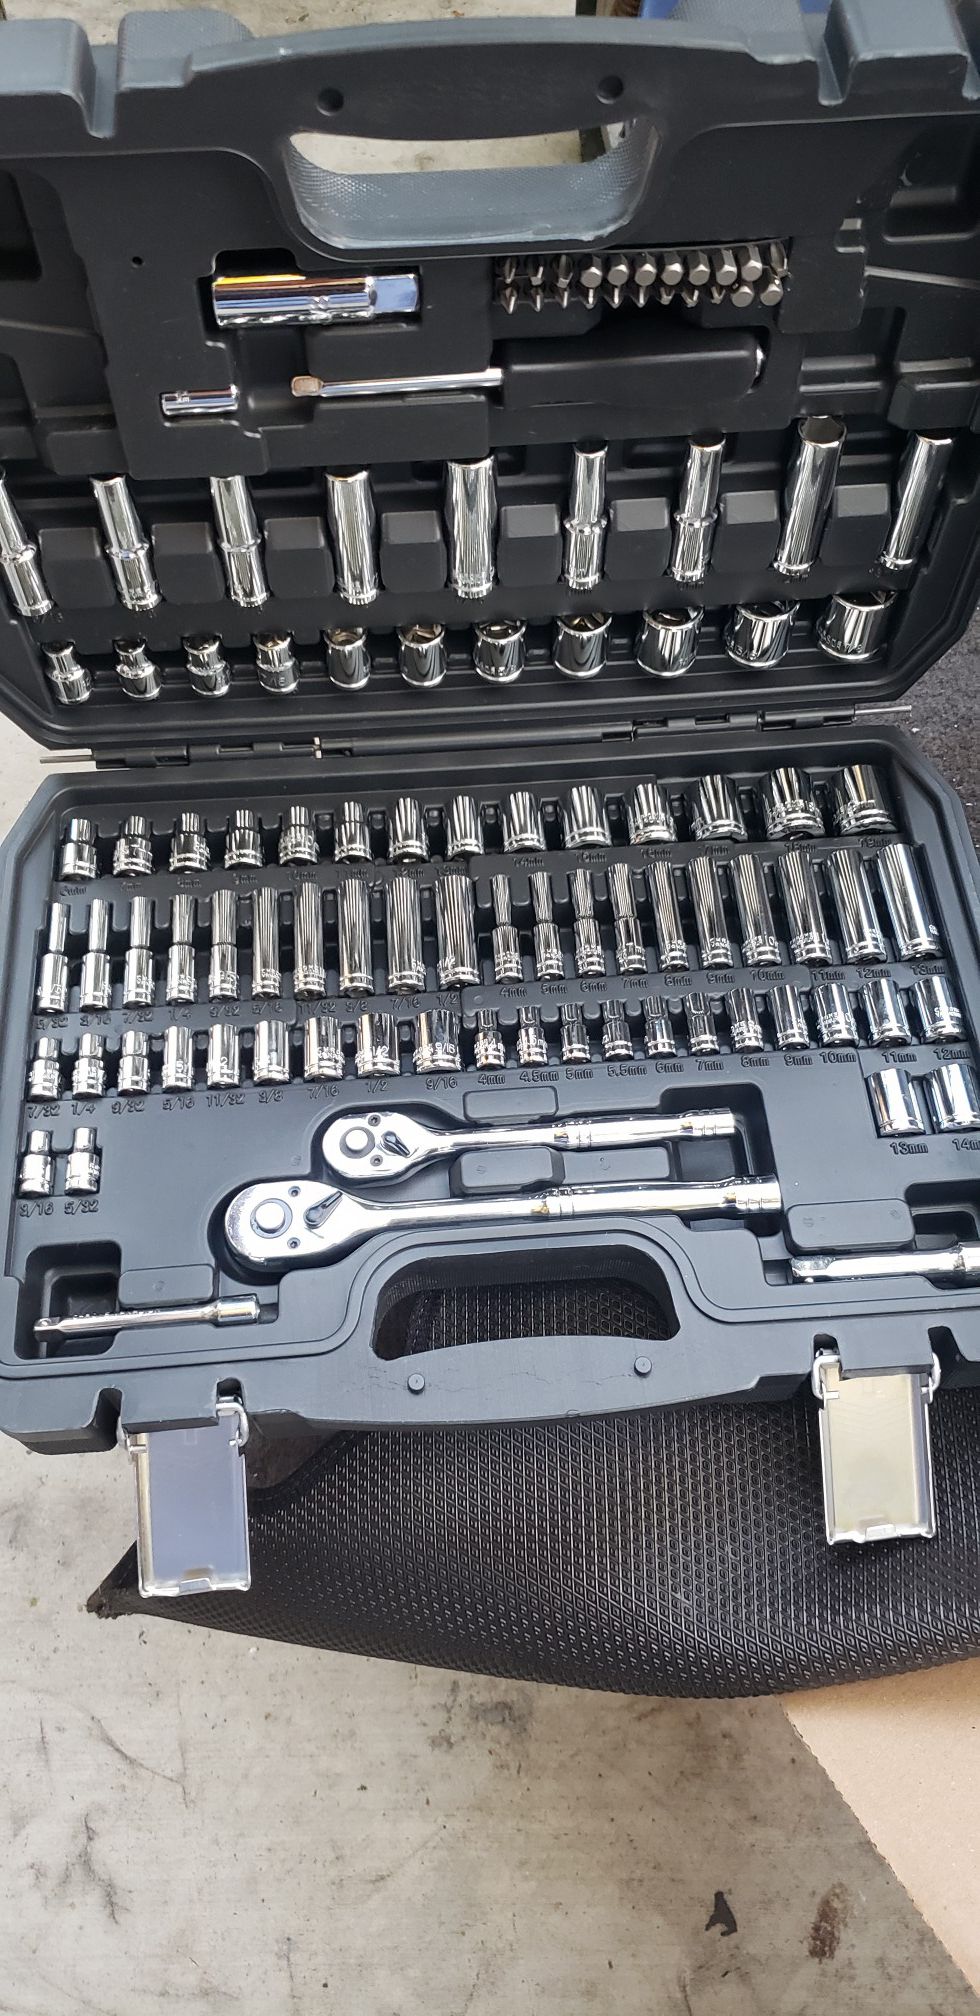 Brand New Mechanic Tool Set 3/8 in. and 1/4 in. Drive Socket Set with 3/8 Ratchets.